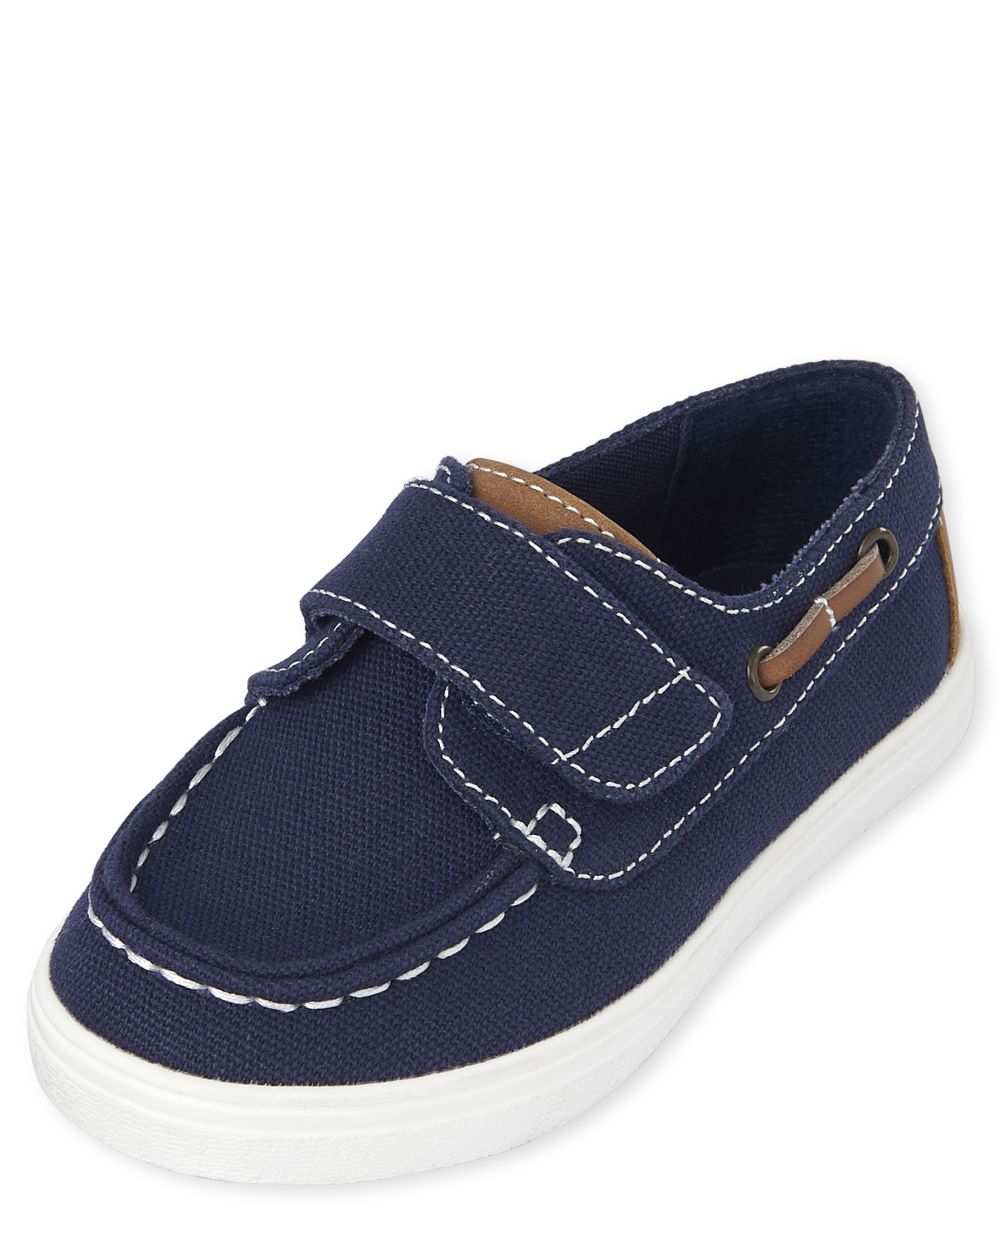 Toddler Boys Easter Matching Boat Shoes